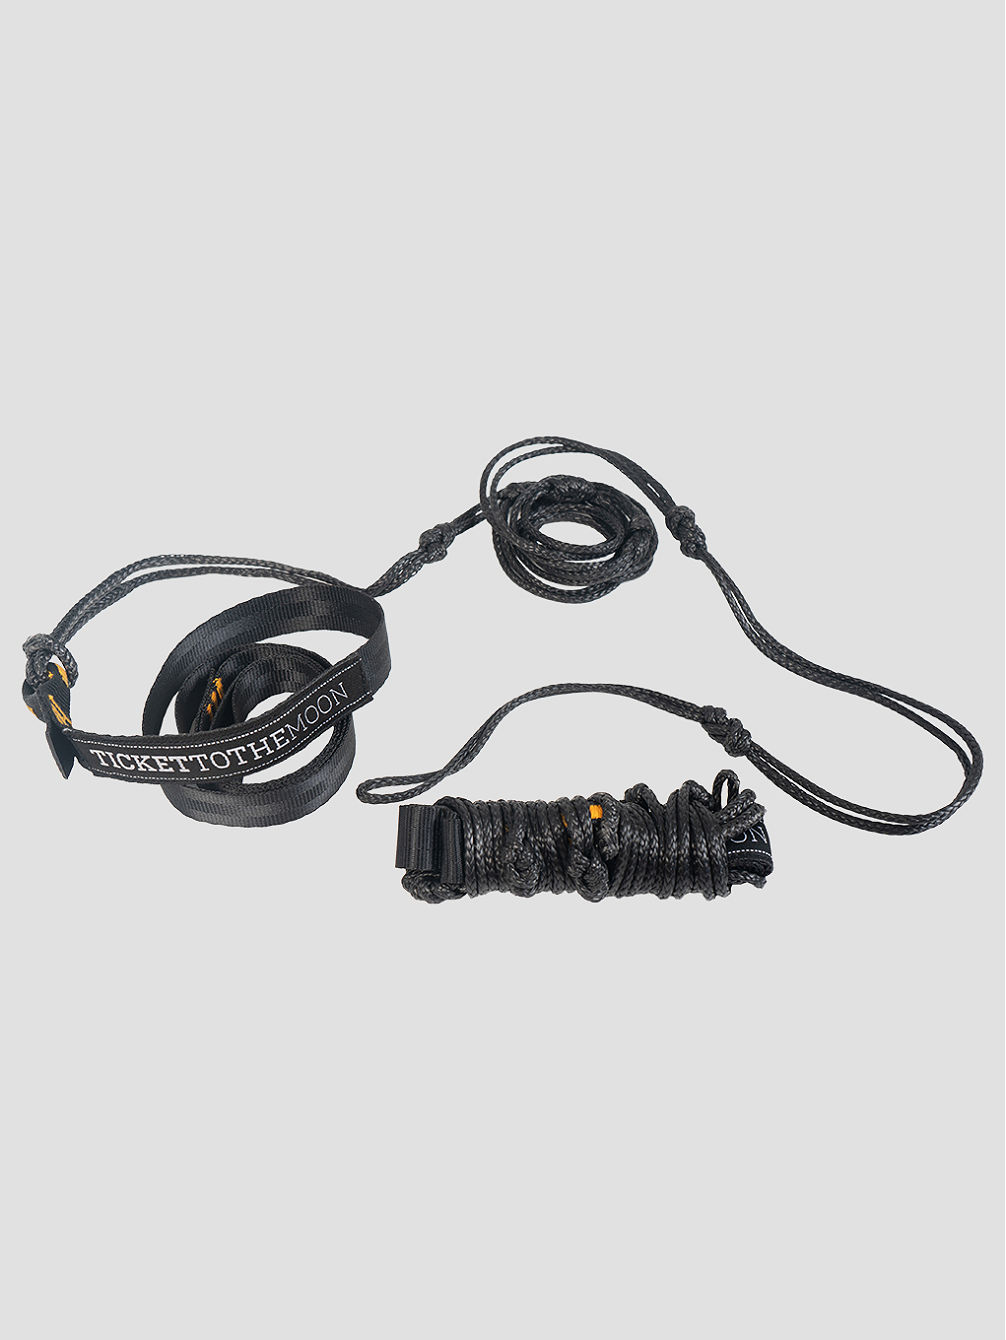 Lightest 1 Set of two UHMPE ropes with 2 Str